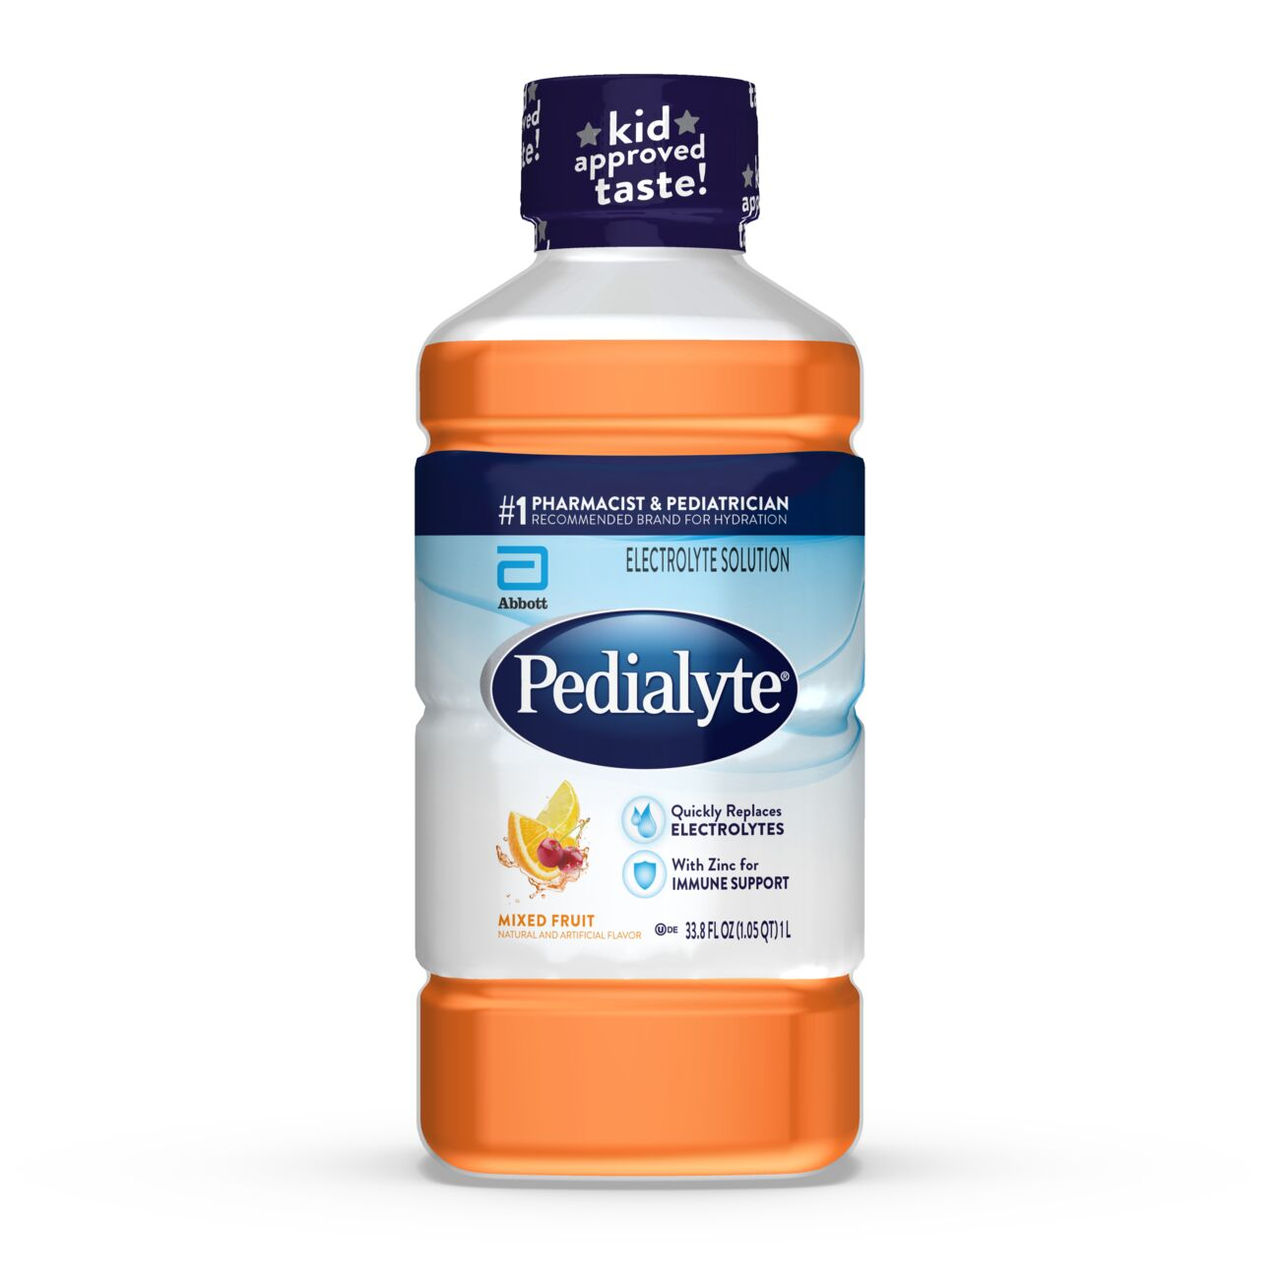 Pedialyte Classic Mixed Fruit flavor